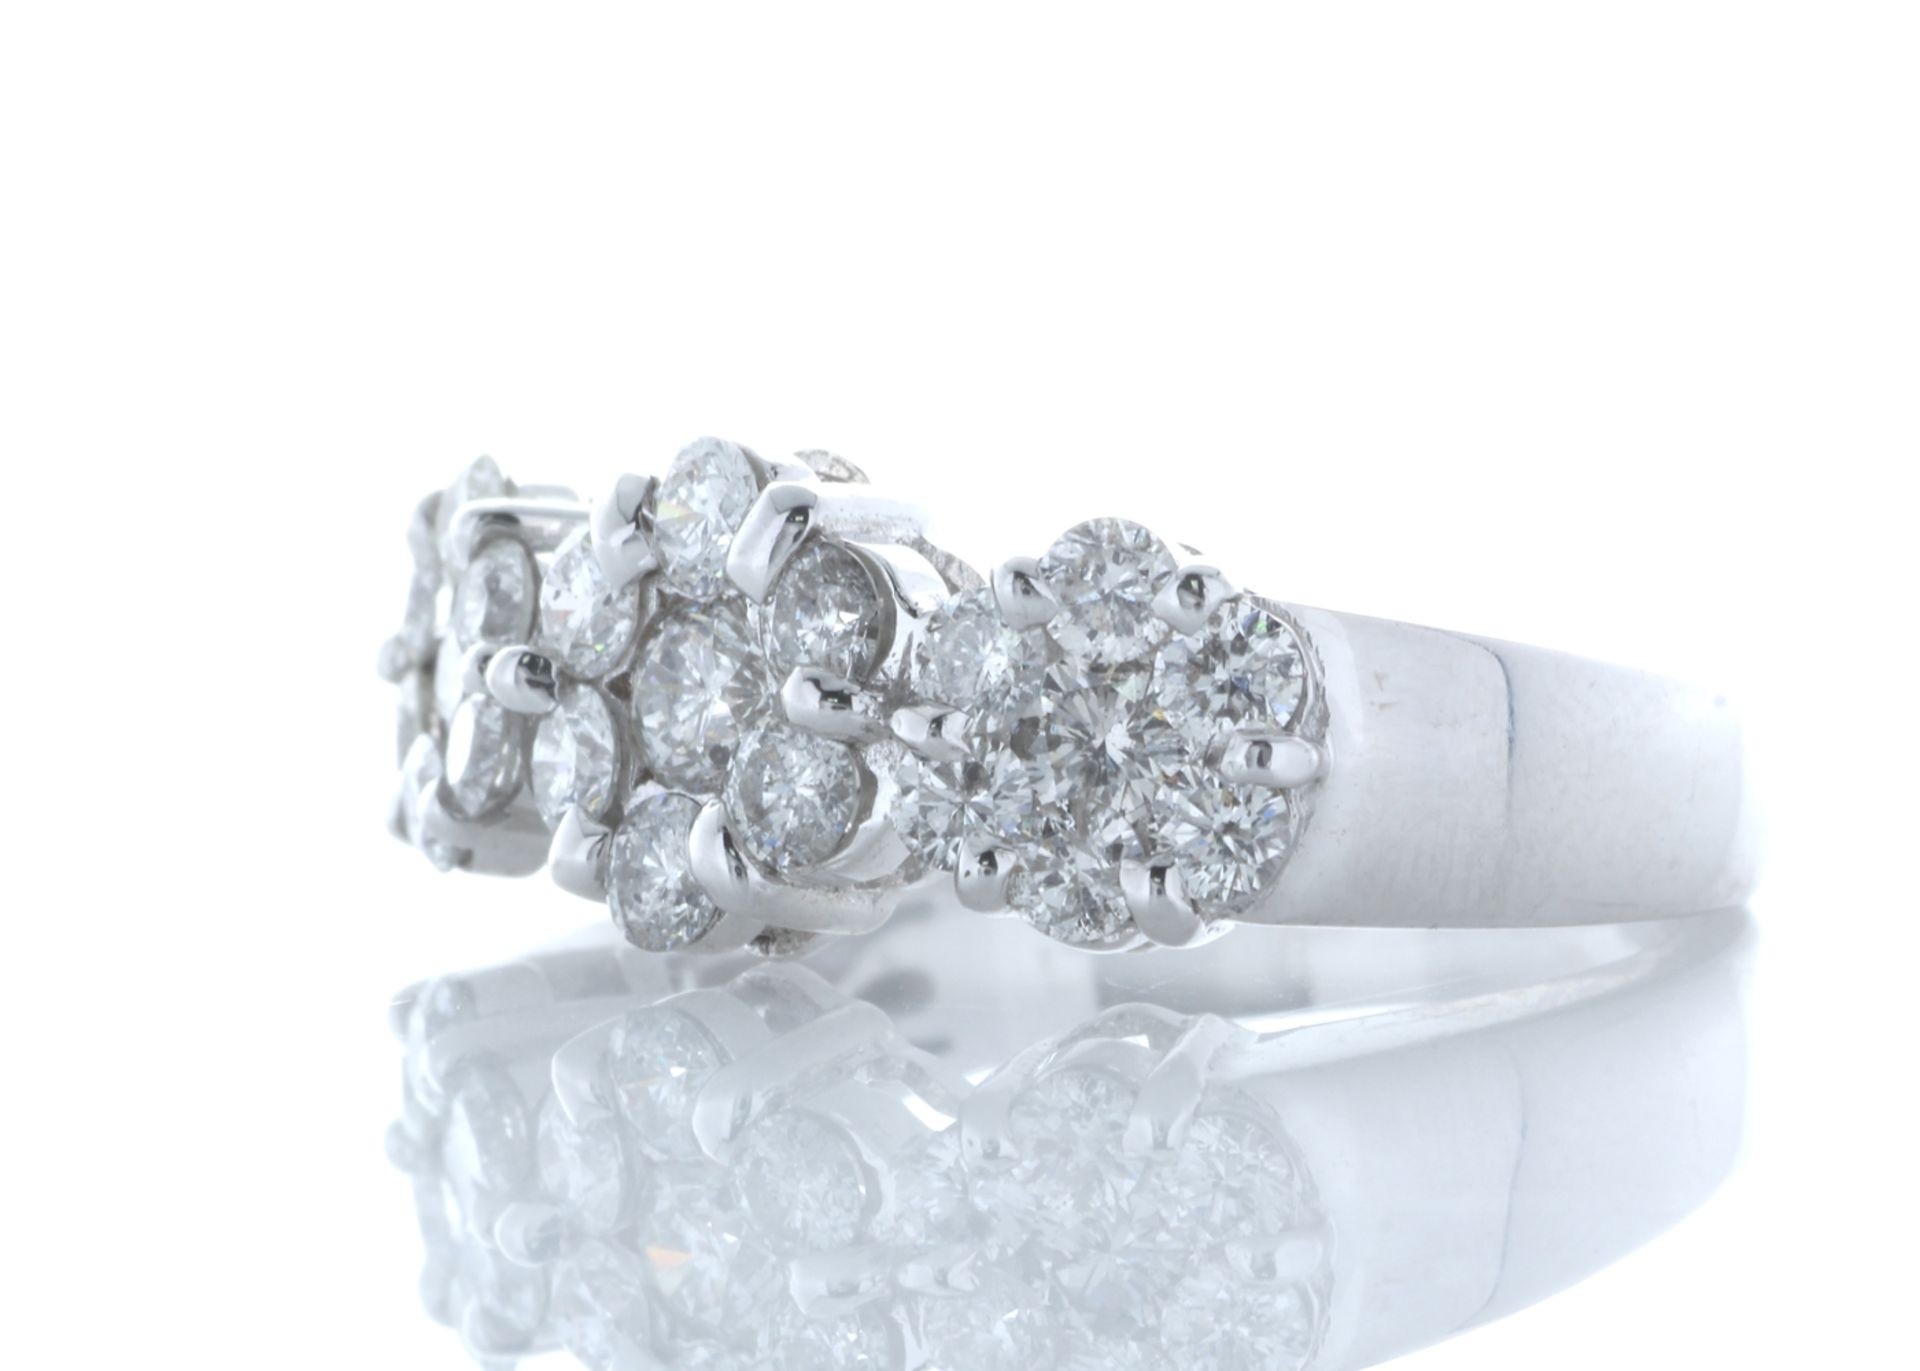 18ct White Gold Flower Cluster Diamond Ring 1.50 Carats - Valued By GIE £11,850.00 - Twenty one - Image 2 of 5